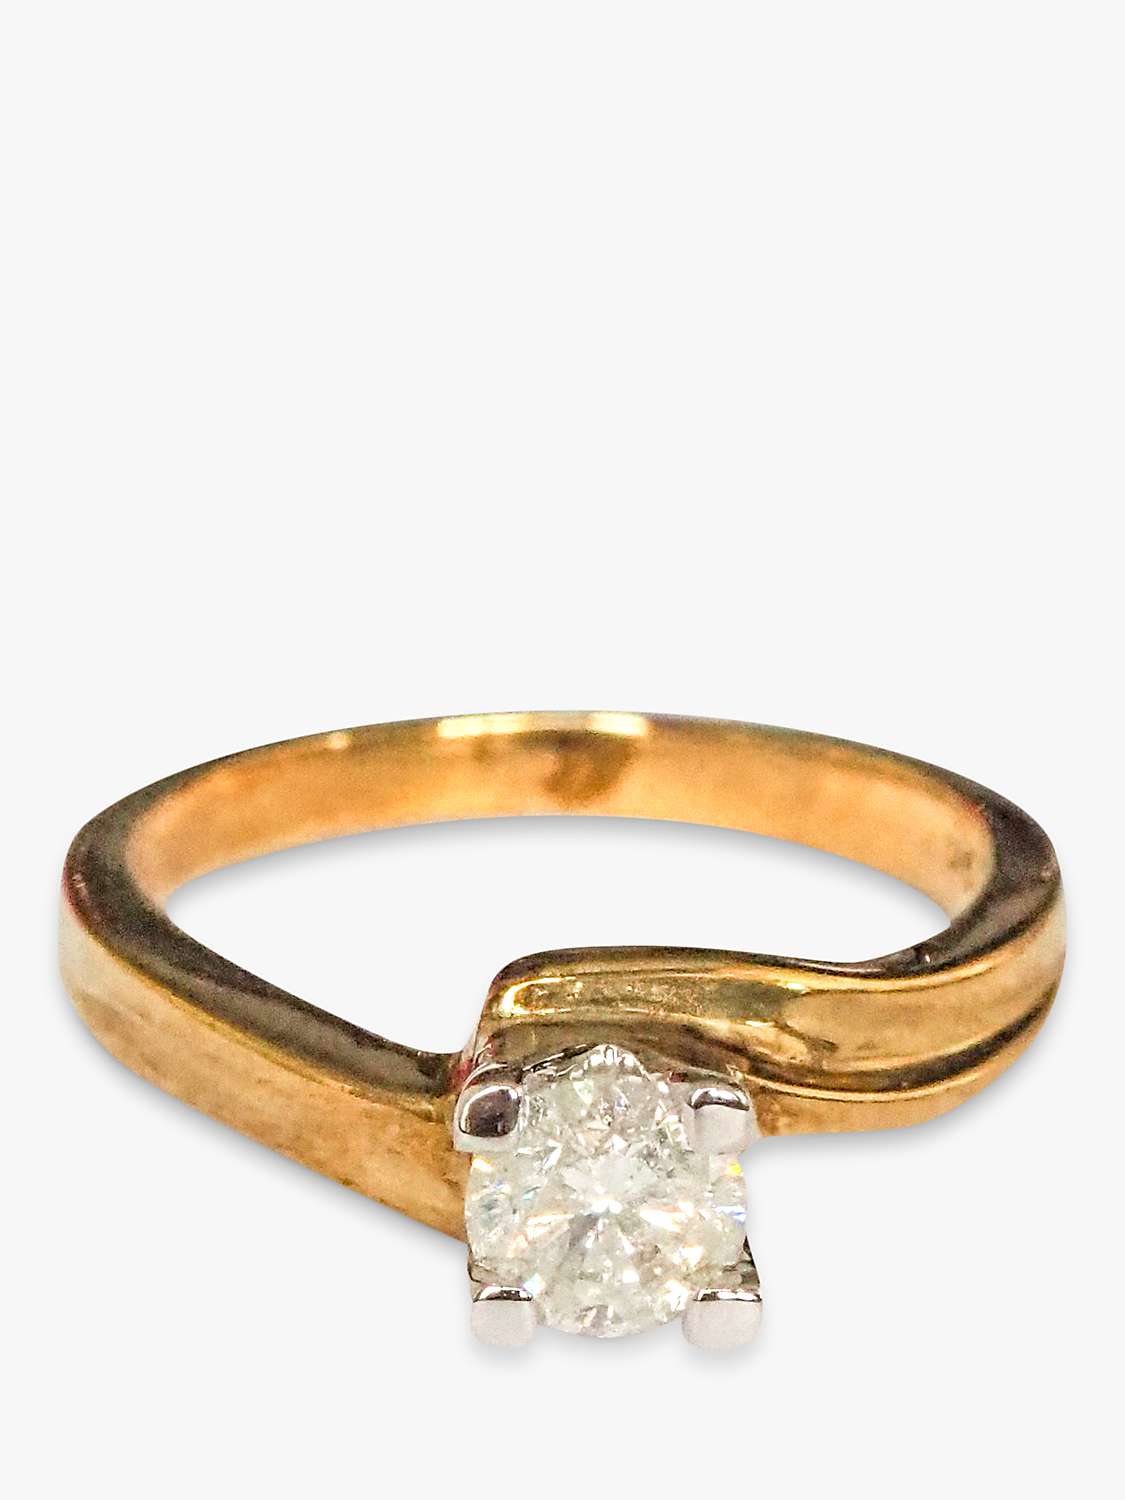 Buy L & T Heirlooms Second Hand 9ct Gold Solitaire Diamond Ring Online at johnlewis.com